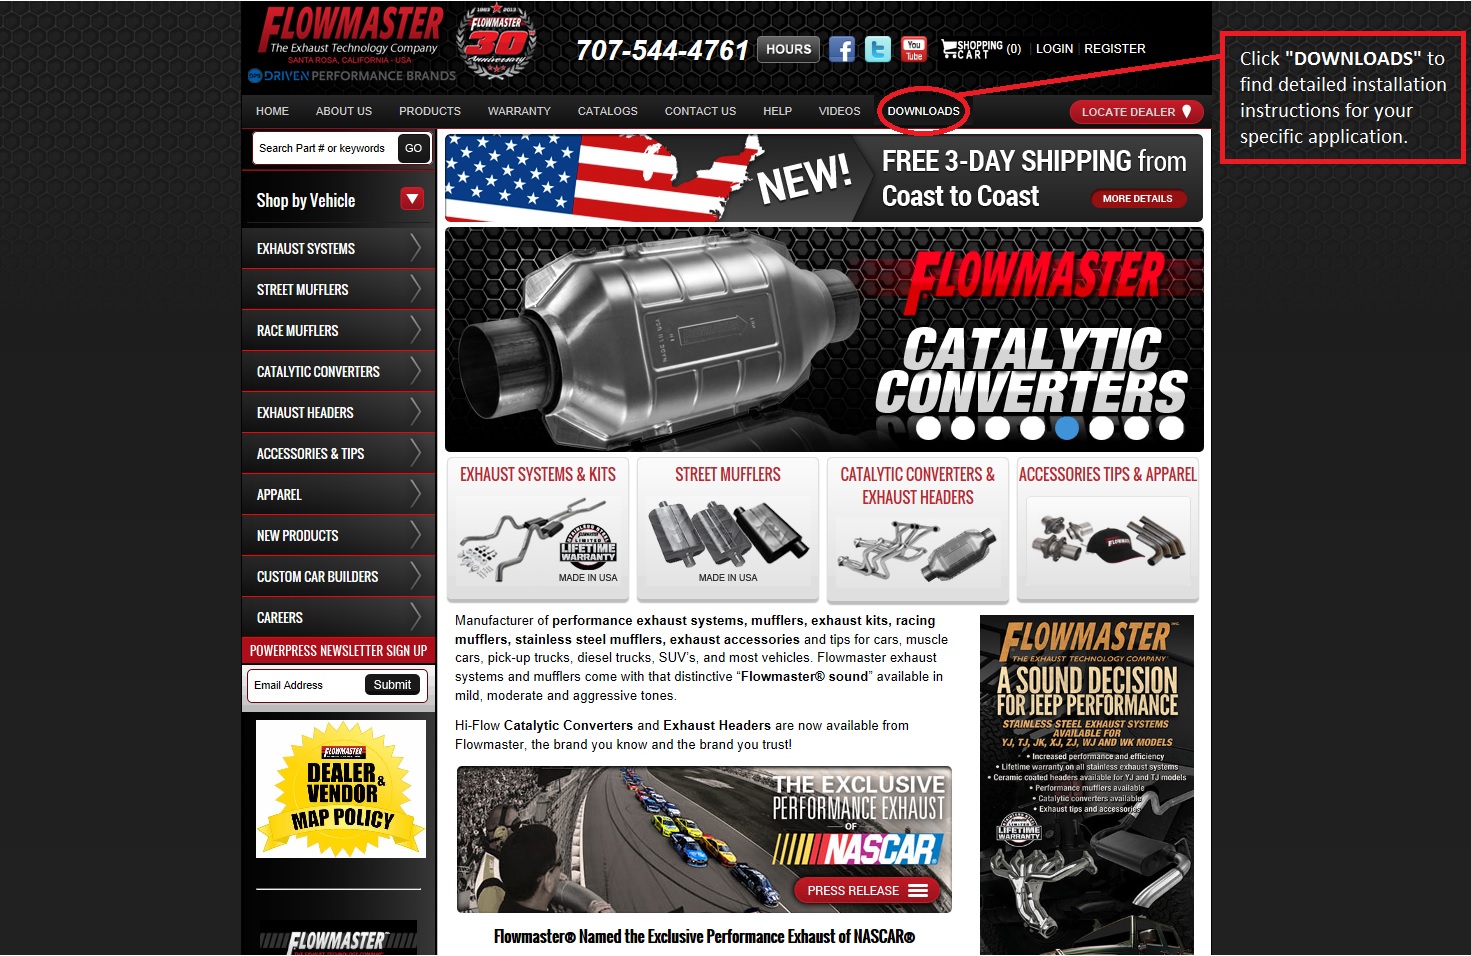 Do you need help installing your new Flowmaster exhaust system